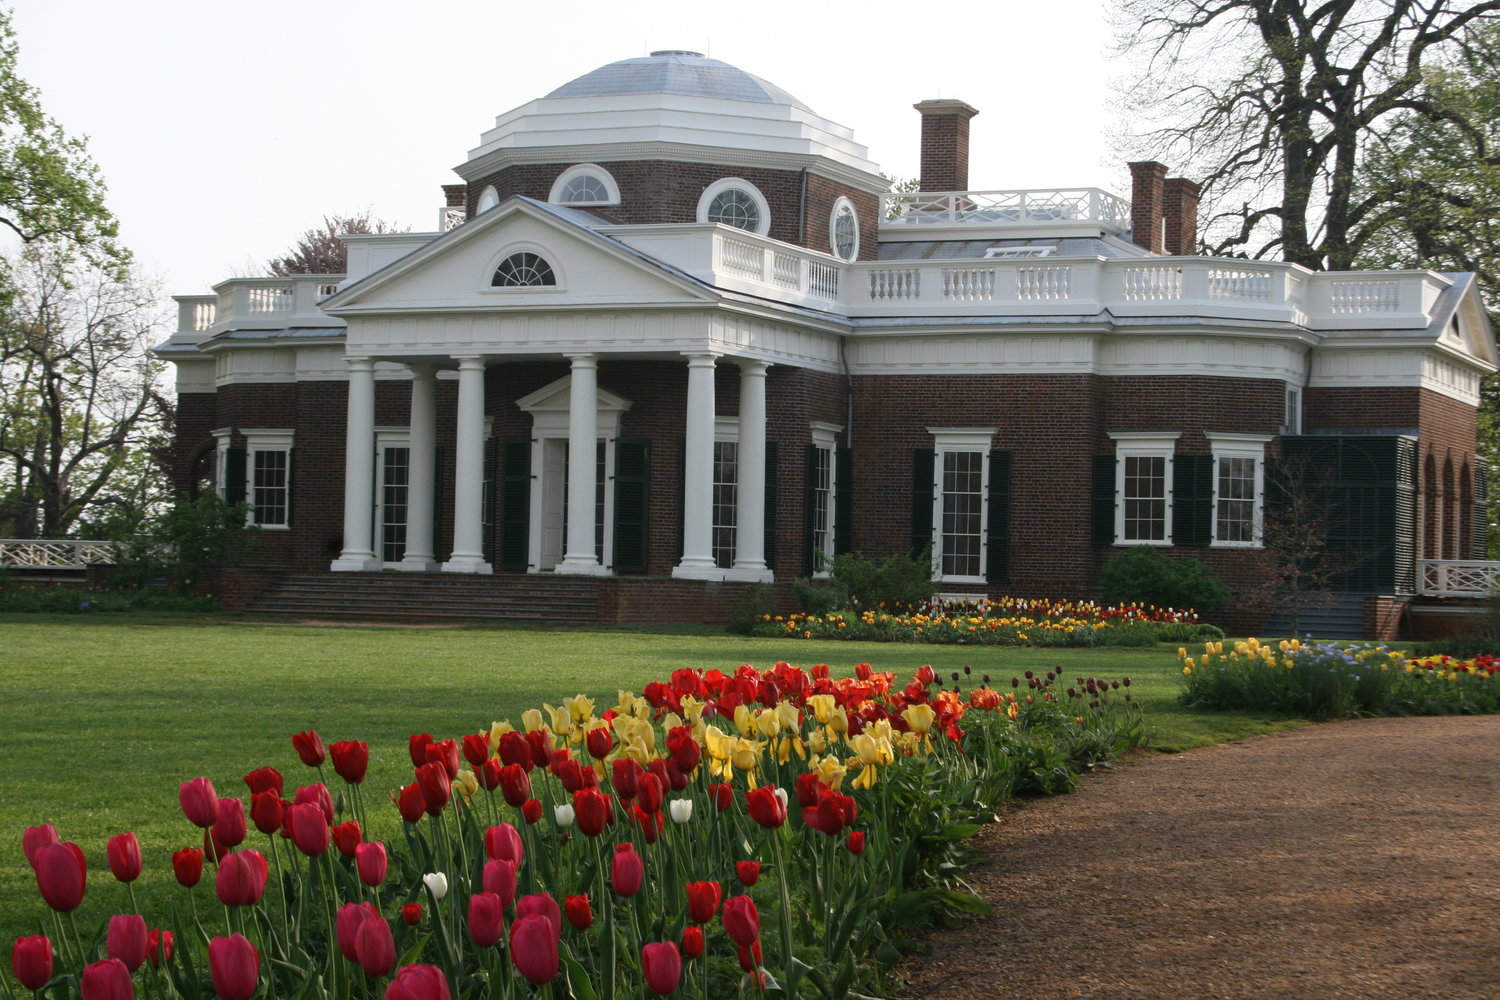 Peter Hatch will present “Thomas Jefferson’s Revolutionary Garden at Monticello” at 7 p.m. Thursday. Hatch is the director of Gardens & Grounds Emeritus for the Thomas Jefferson Foundation. He was responsible for maintenance, interpretation and restoration of the 2,400-acre landscape at Monticello from 1977 to 2012.